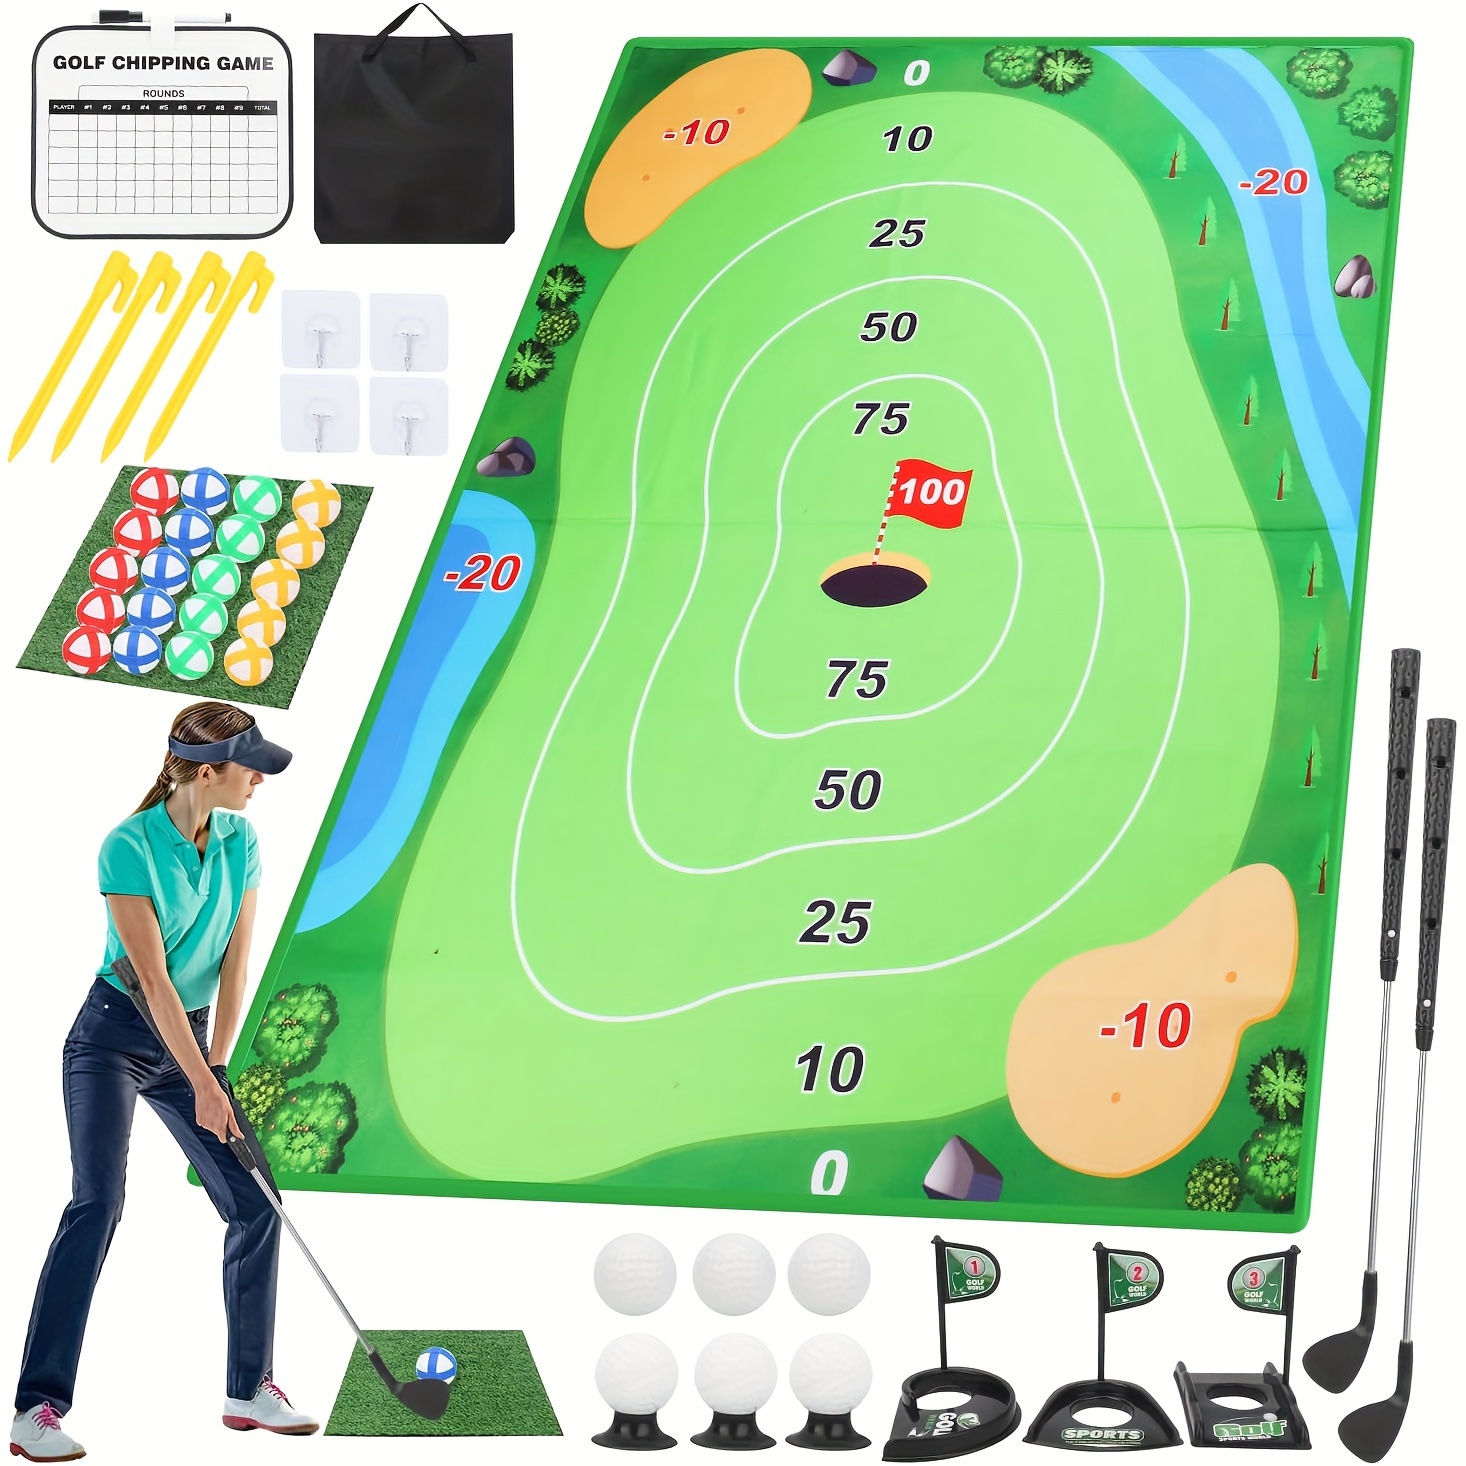 

Chipping Golf Game Mat Set Indoor Outdoor Games, Backyard Golf Games For Adults Kids Practice, Golf Training Aid Equipment Stick Chip Game